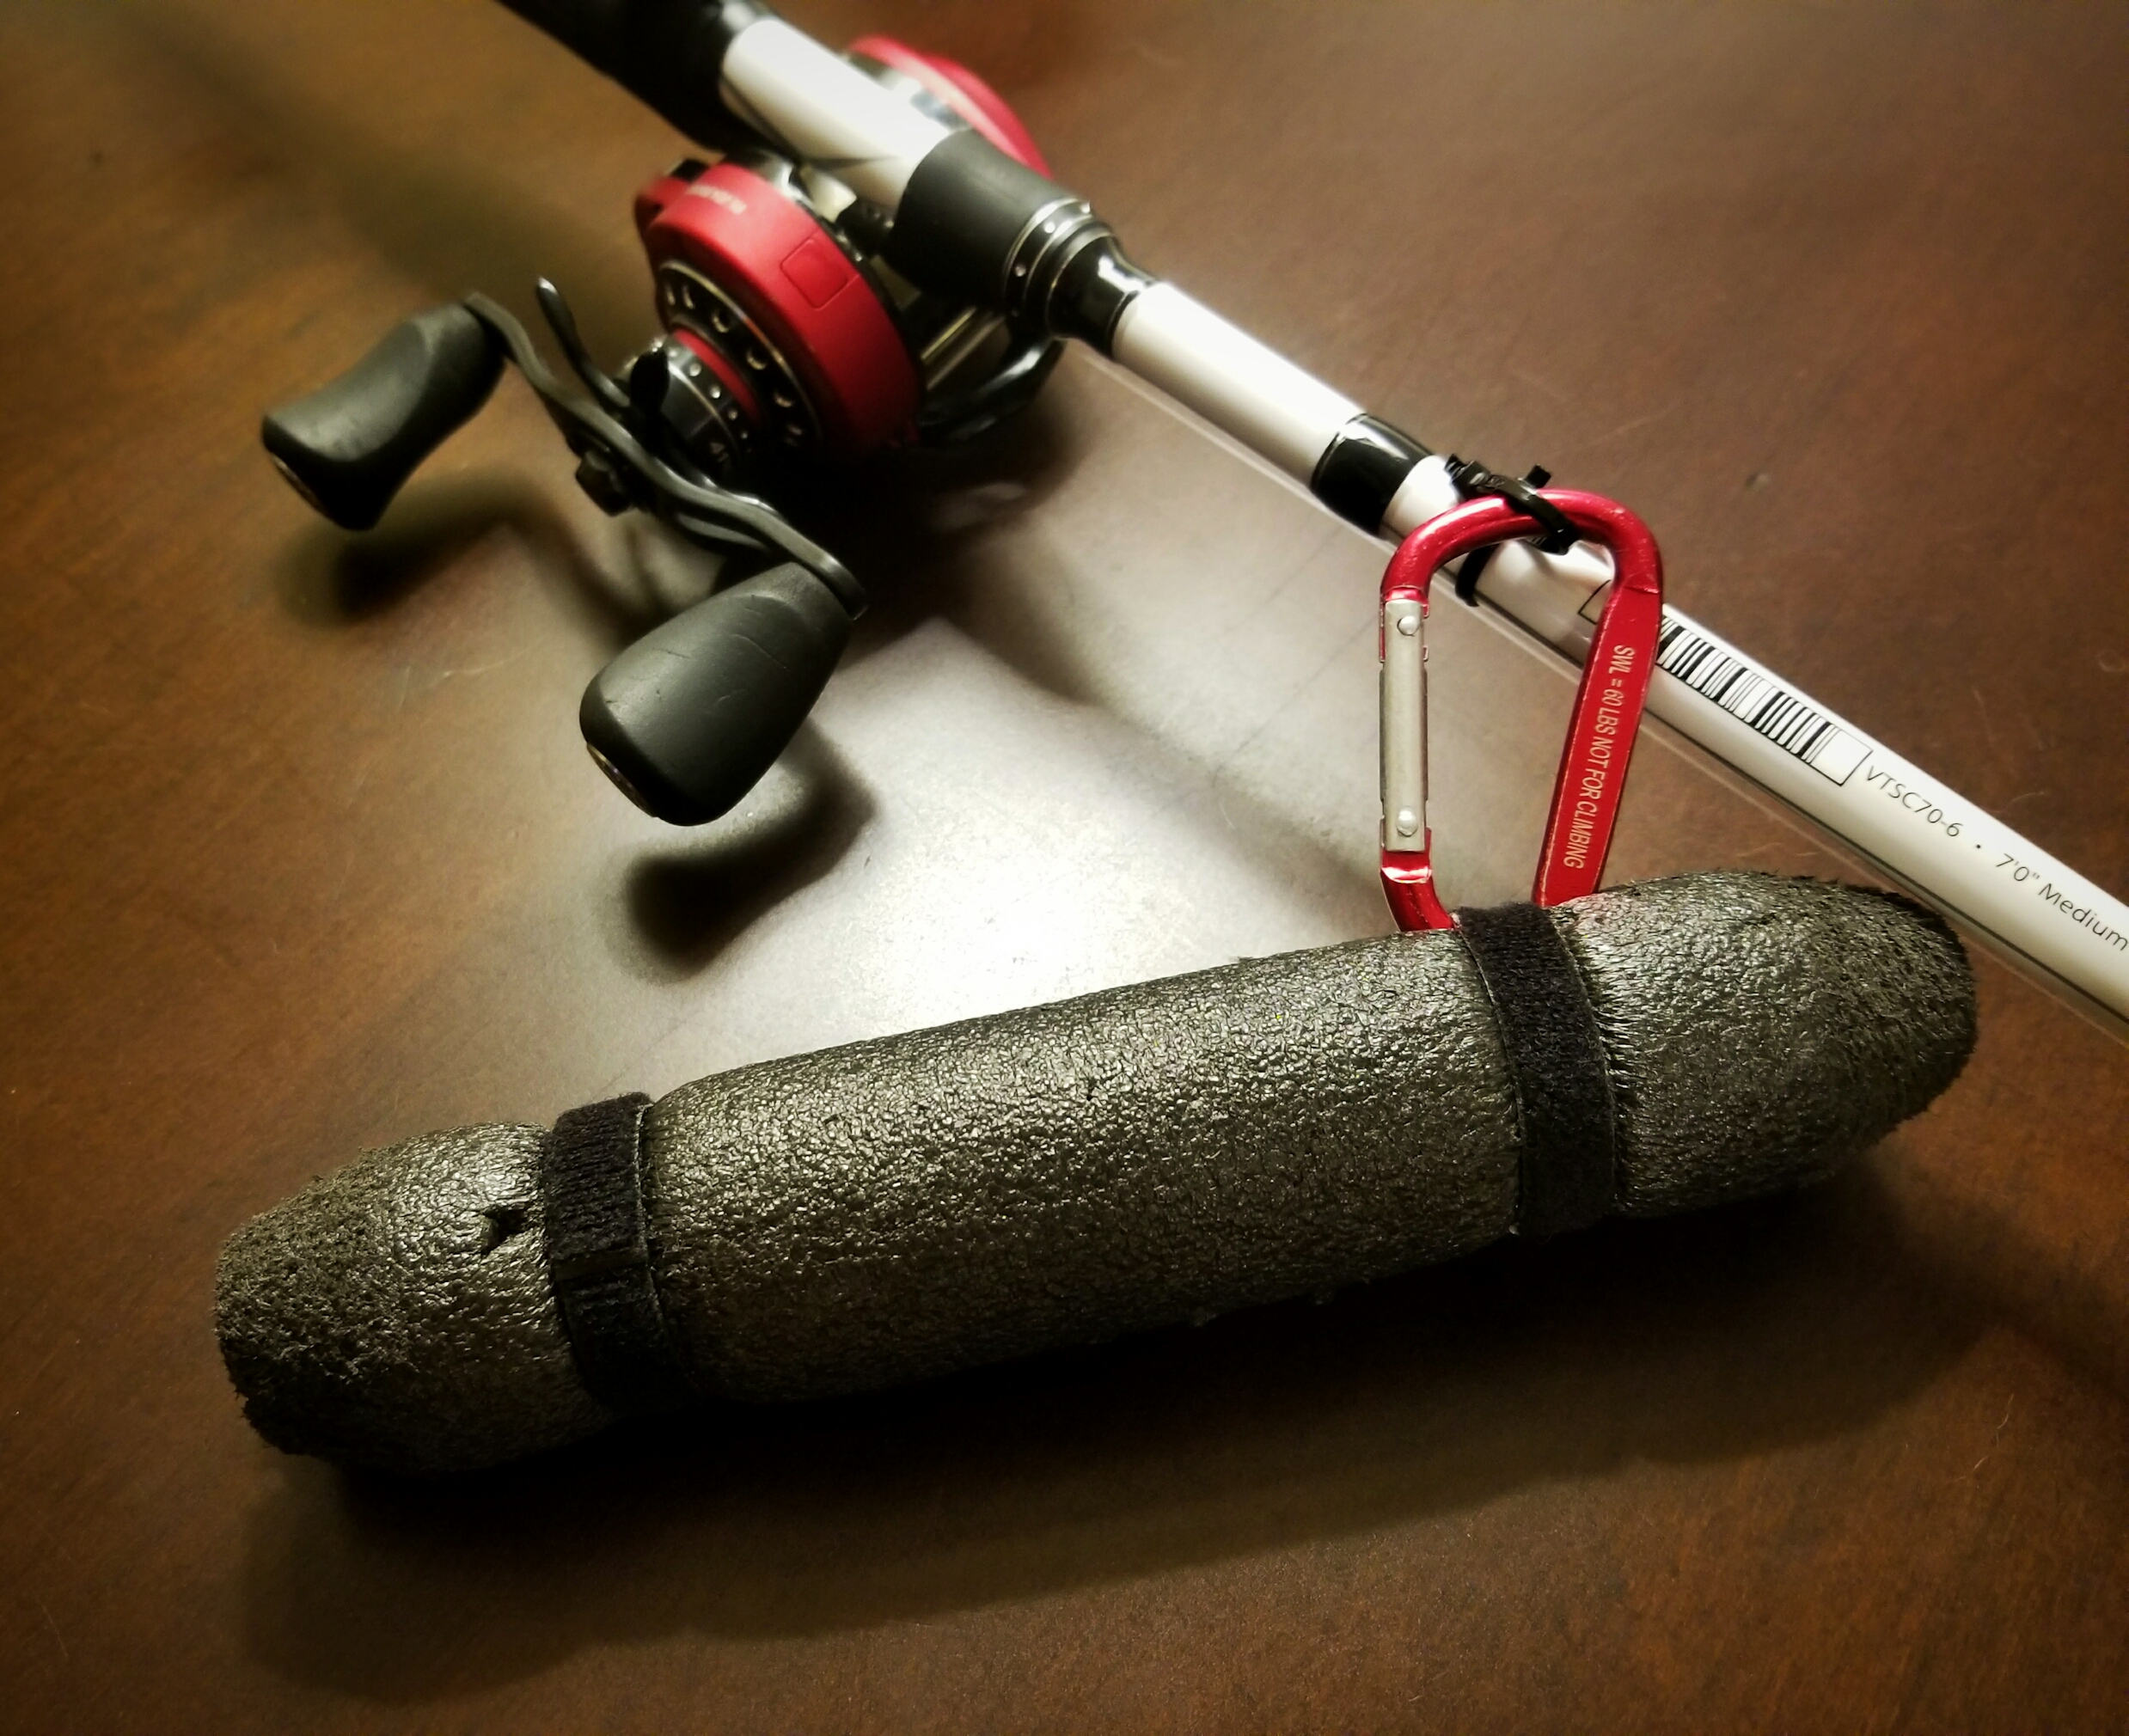 Abu Garcia rod and reel with a black rod float clipped to the zip-tie on the blank